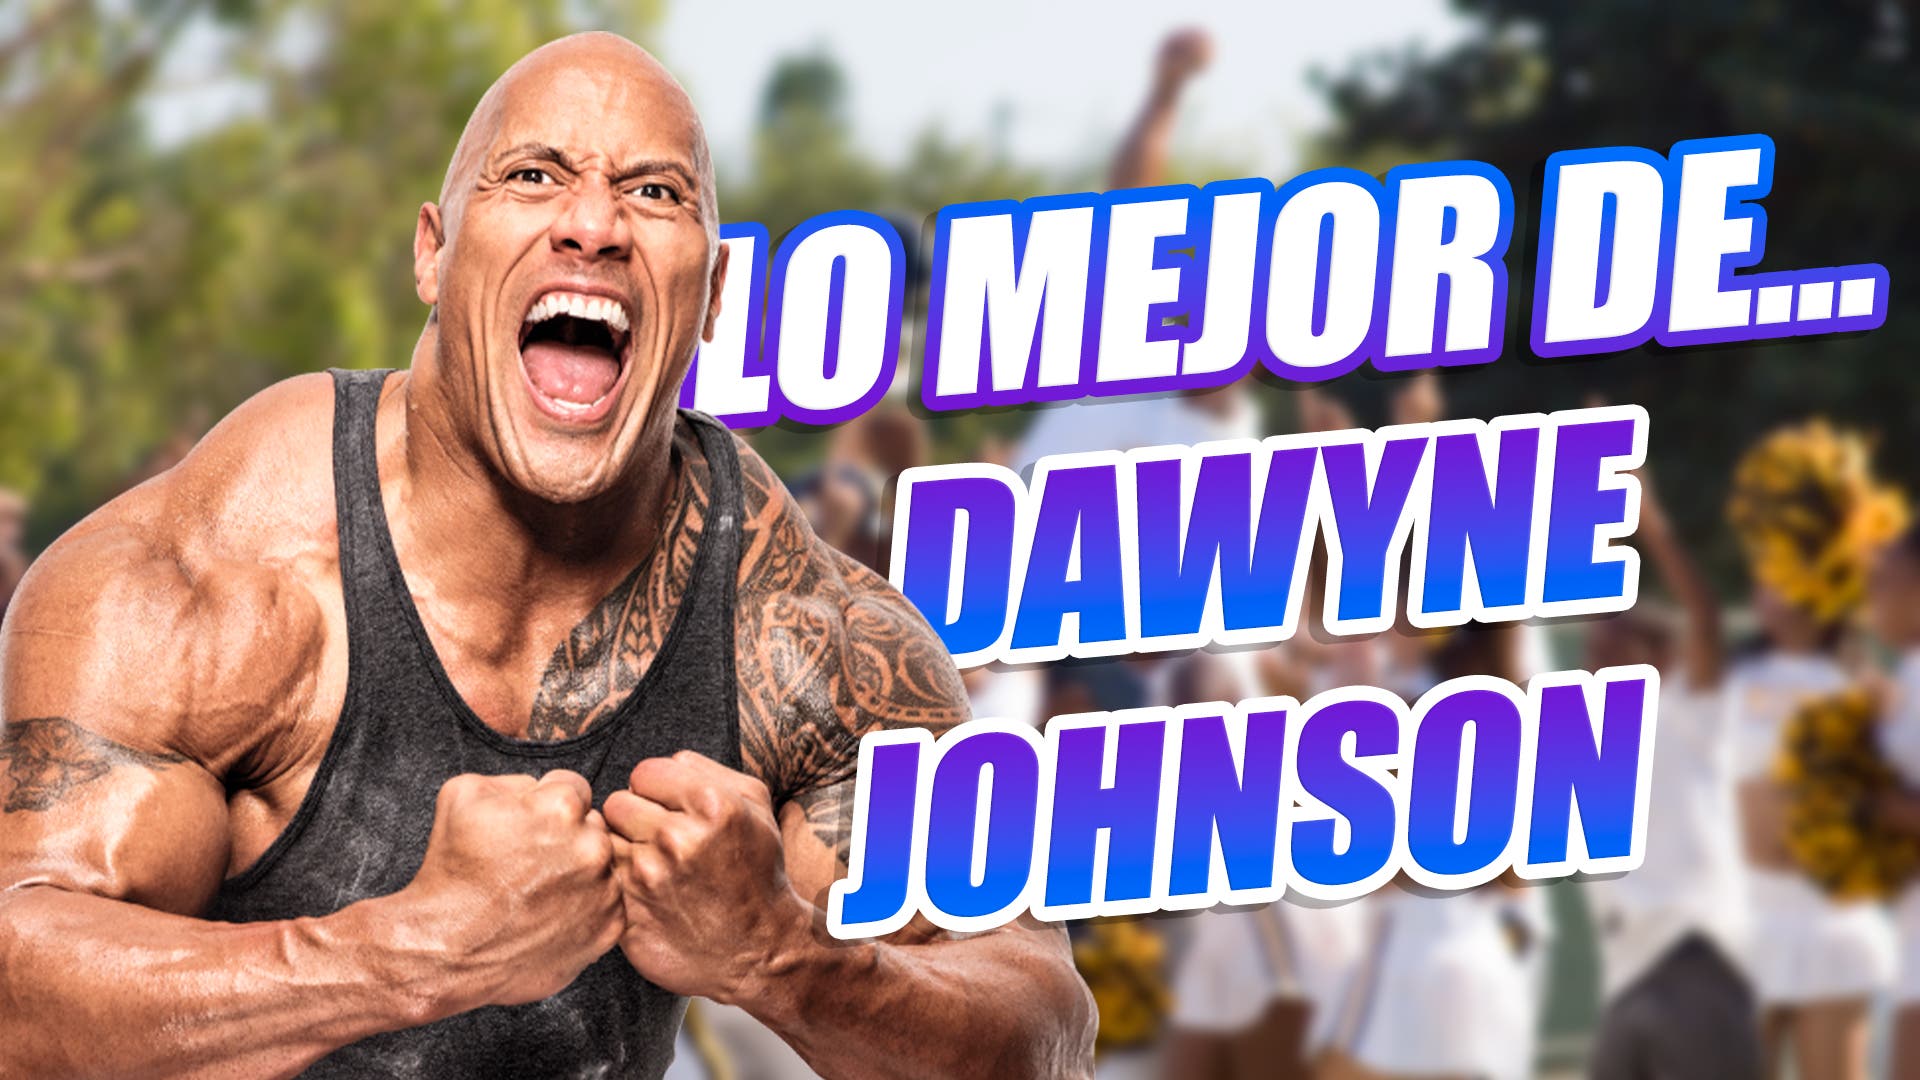 It’s one of Dwayne Johnson’s best movies and it’s available on Netflix